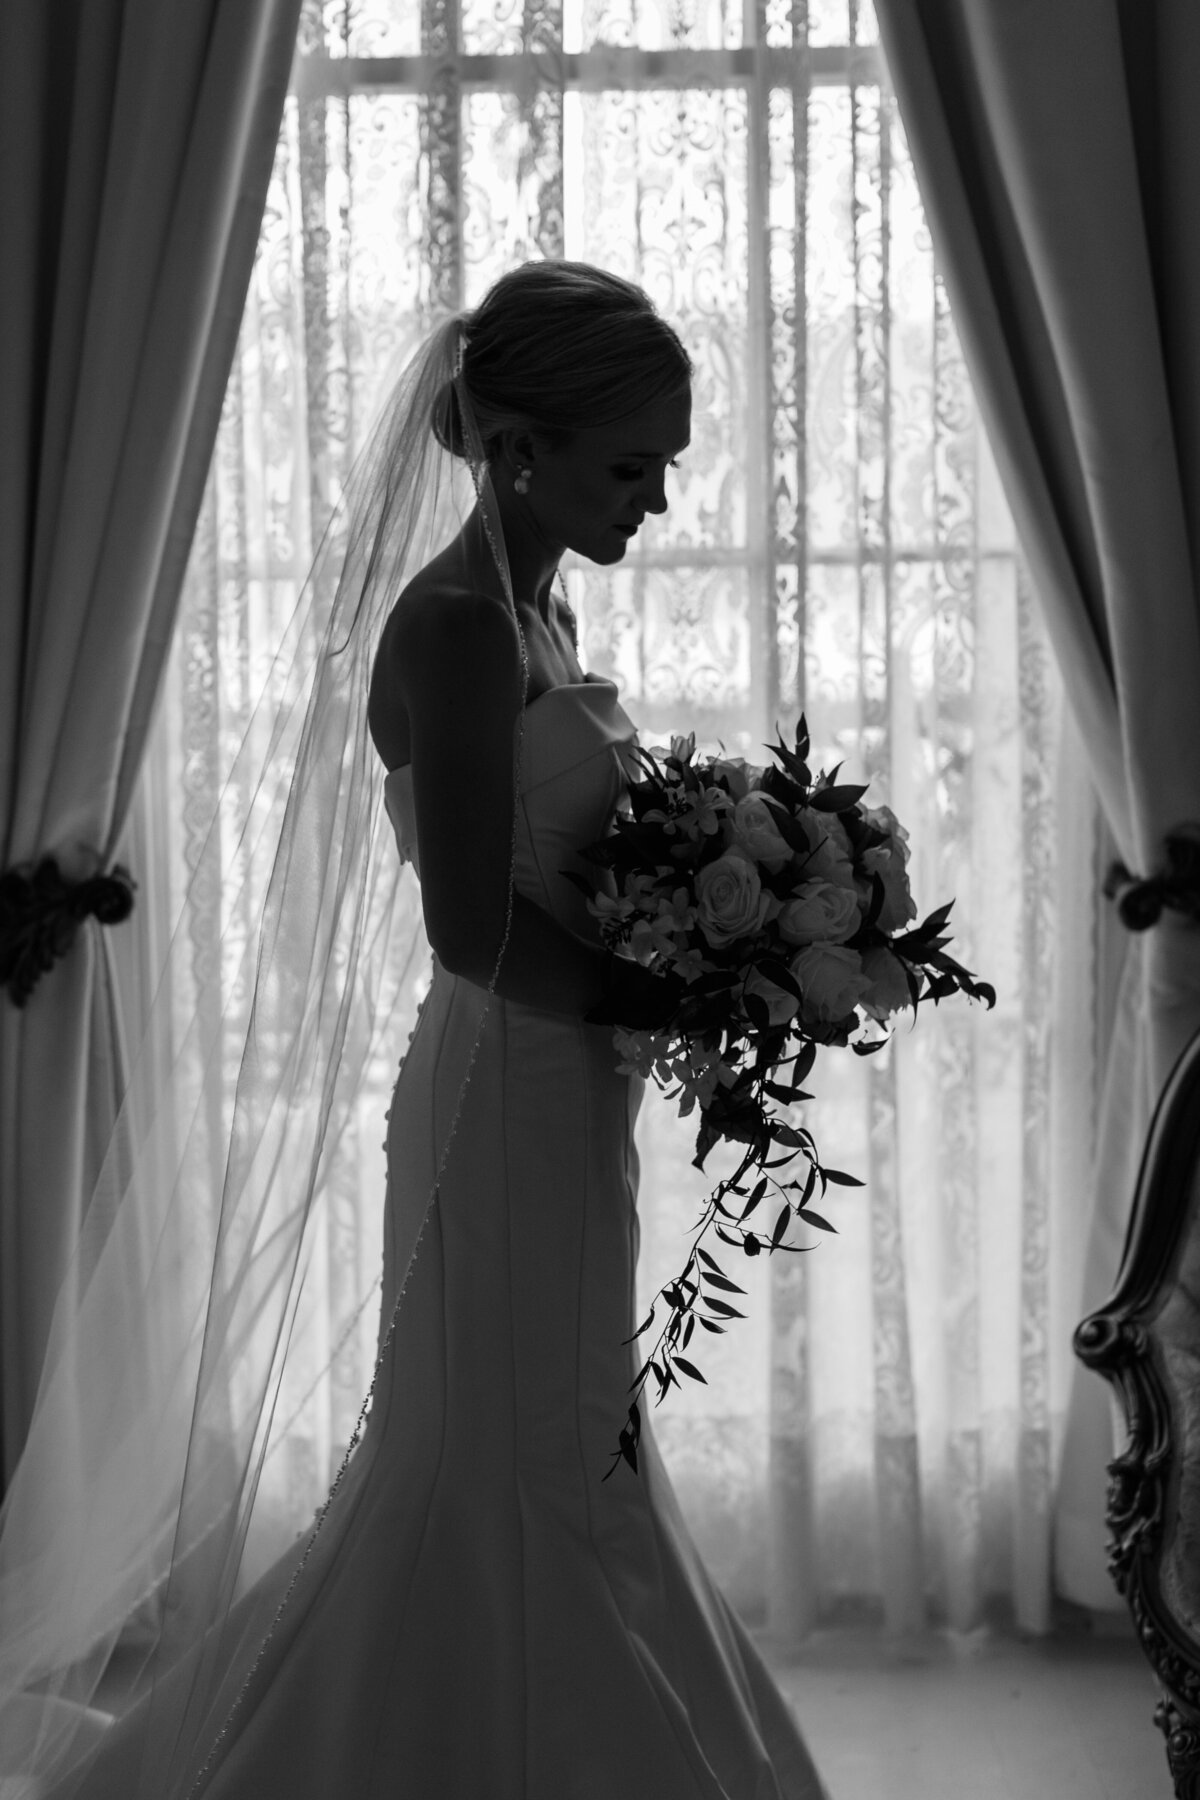 The silhouette captures the elegance of the bride.